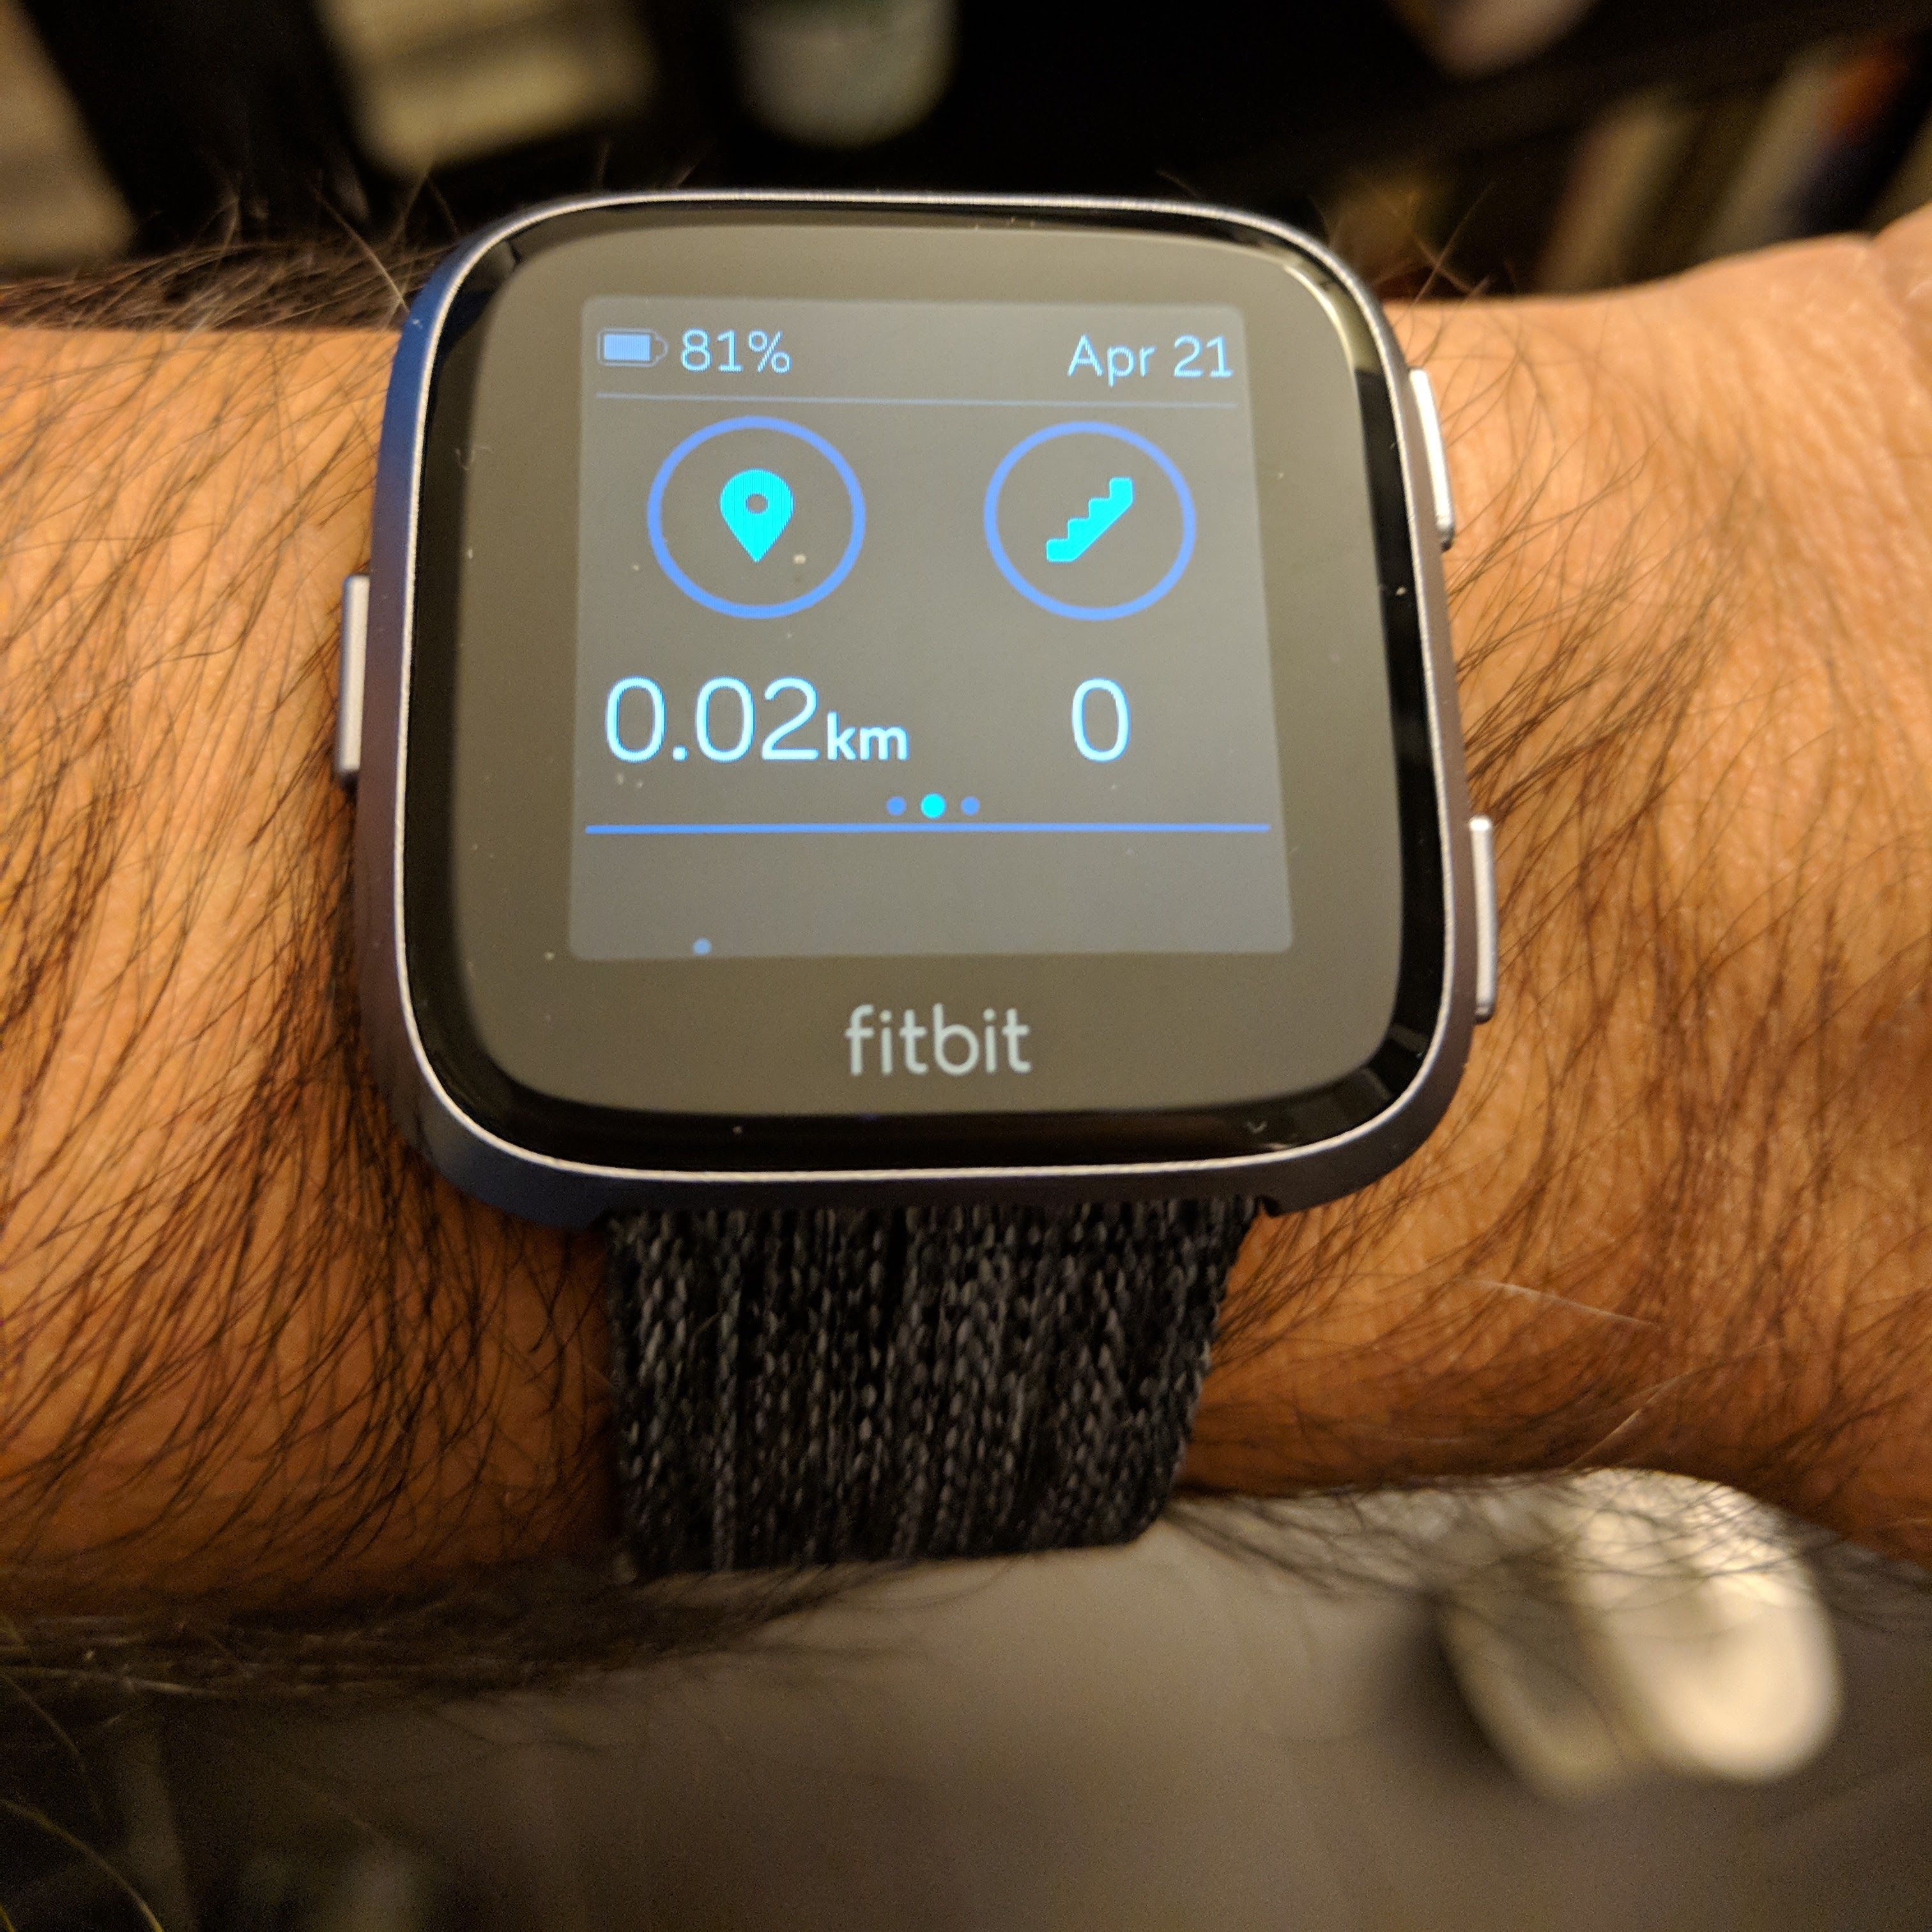 fitbit that tracks stairs